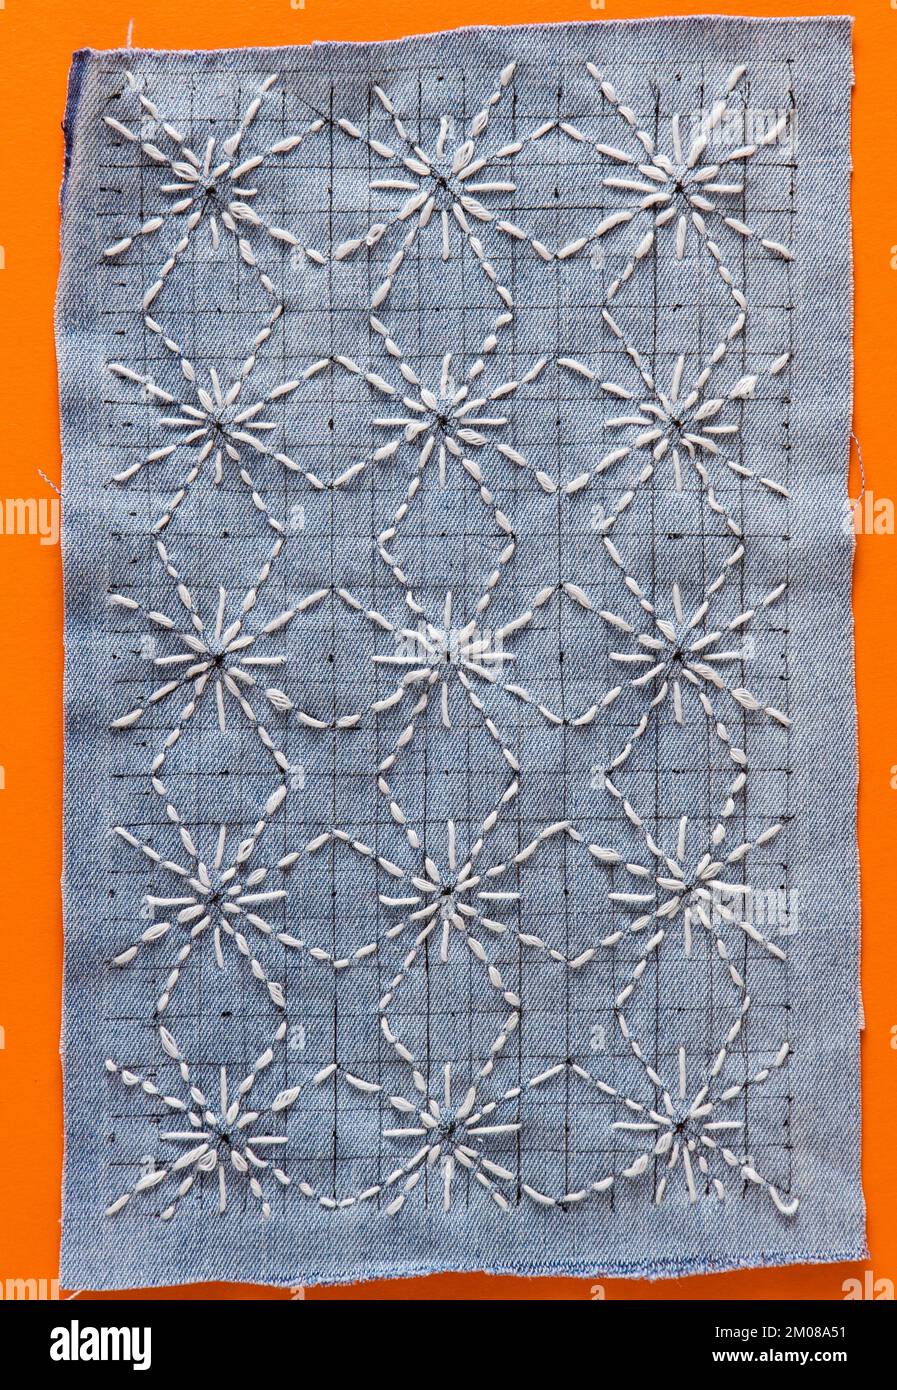 Sashiko embroidery sewing stitch blue fabric. Traditional Japanese sewing pattern call SASHIKO. Learning needlework, teaching how to do, hand work, Japan craft hobby concept. DIY Stock Photo